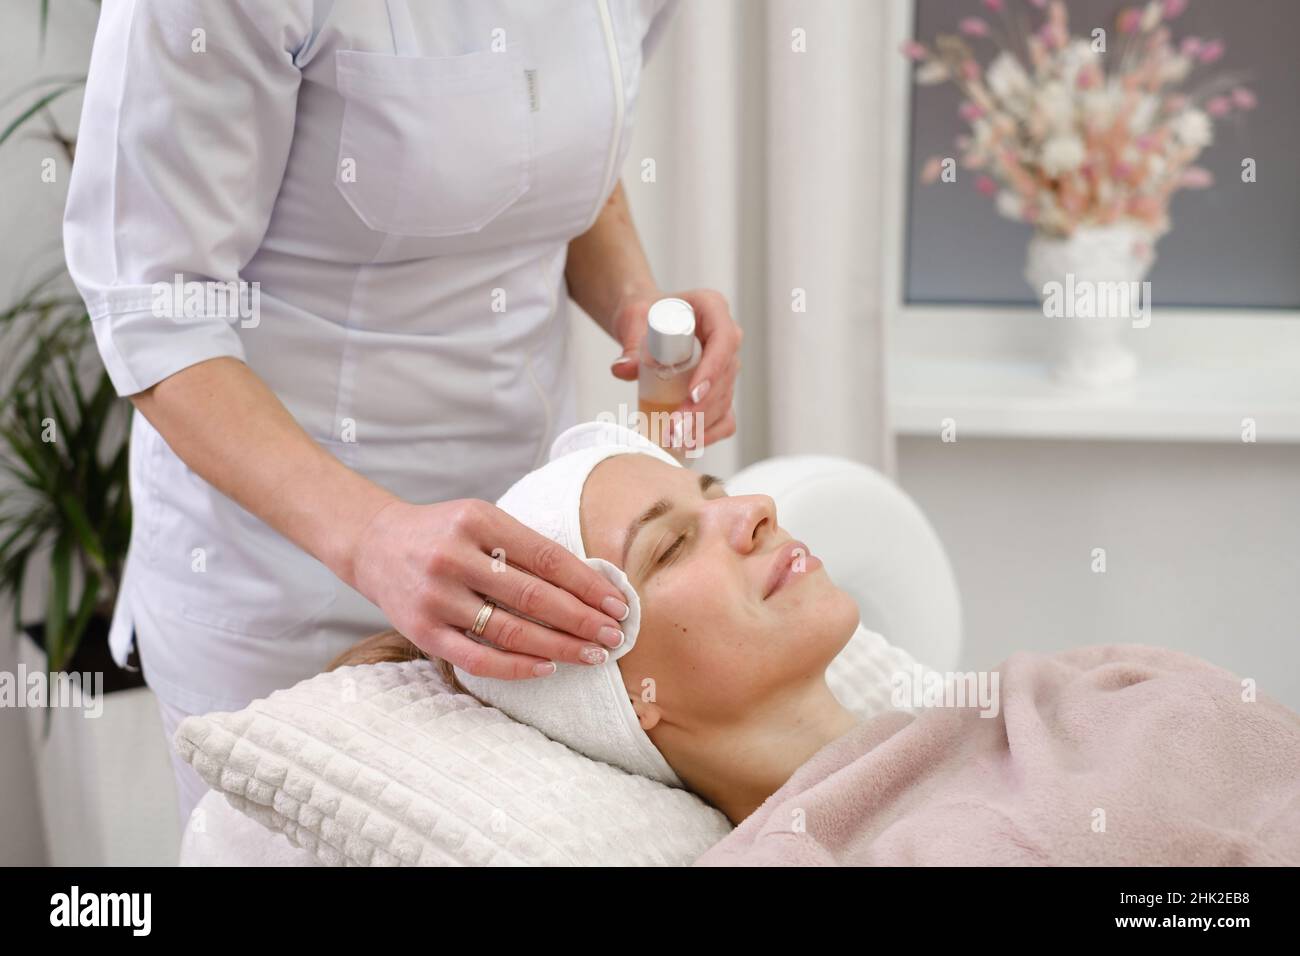 Cosmetologist cleaning skin with cotton pad, care and treatment procedure in modern aesthetic clinic. Woman applies tonic on face in beauty salon Stock Photo